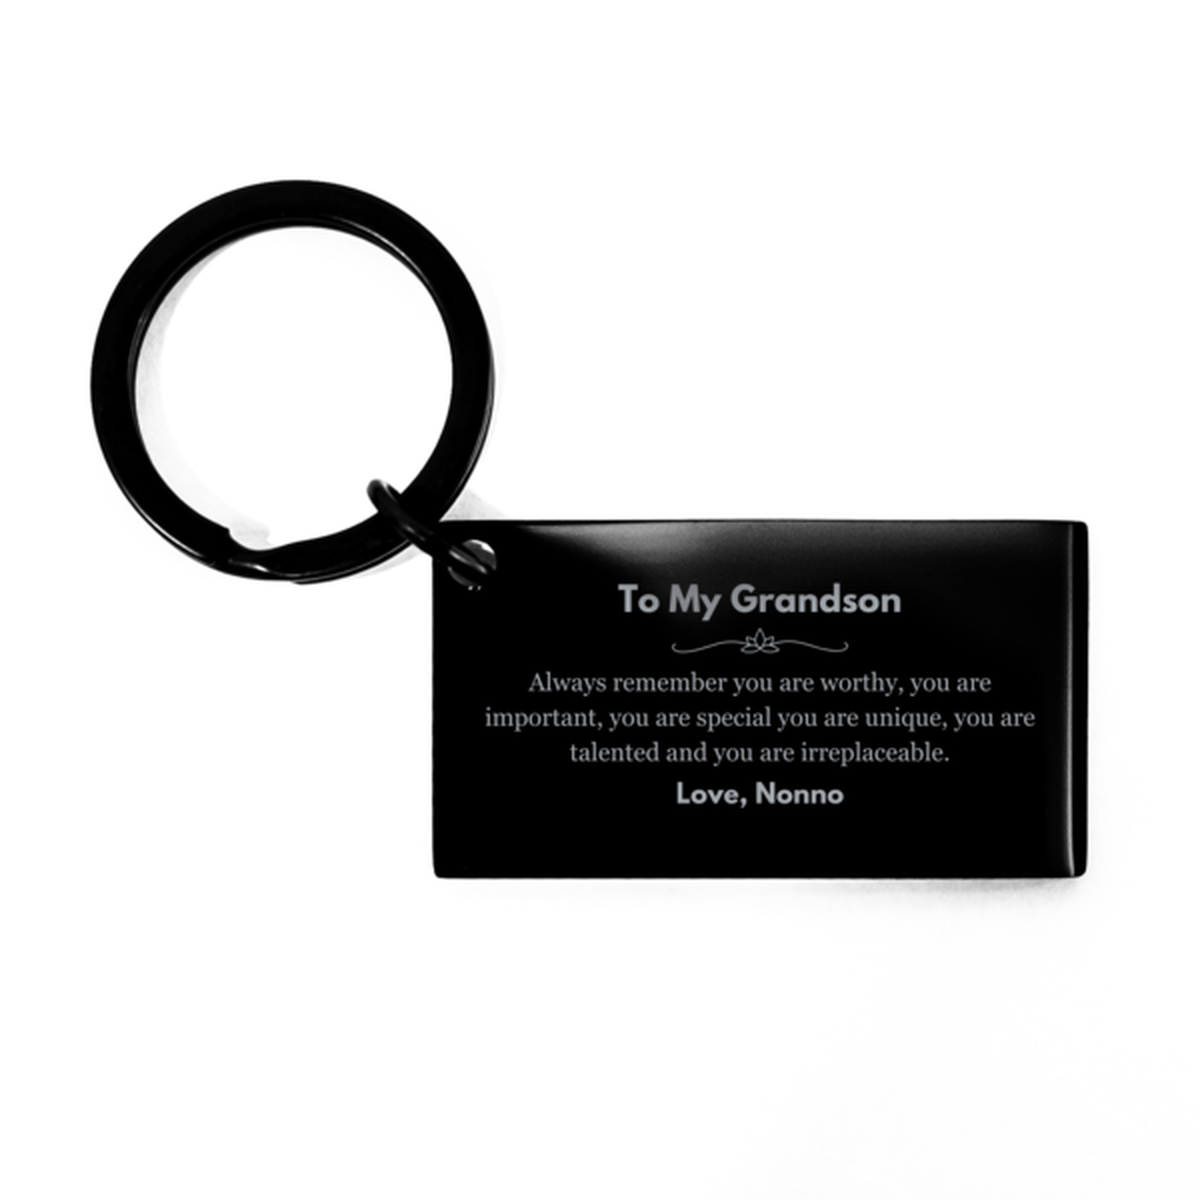 Grandson Birthday Gifts from Nonno, Inspirational Keychain for Grandson Christmas Graduation Gifts for Grandson Always remember you are worthy, you are important. Love, Nonno